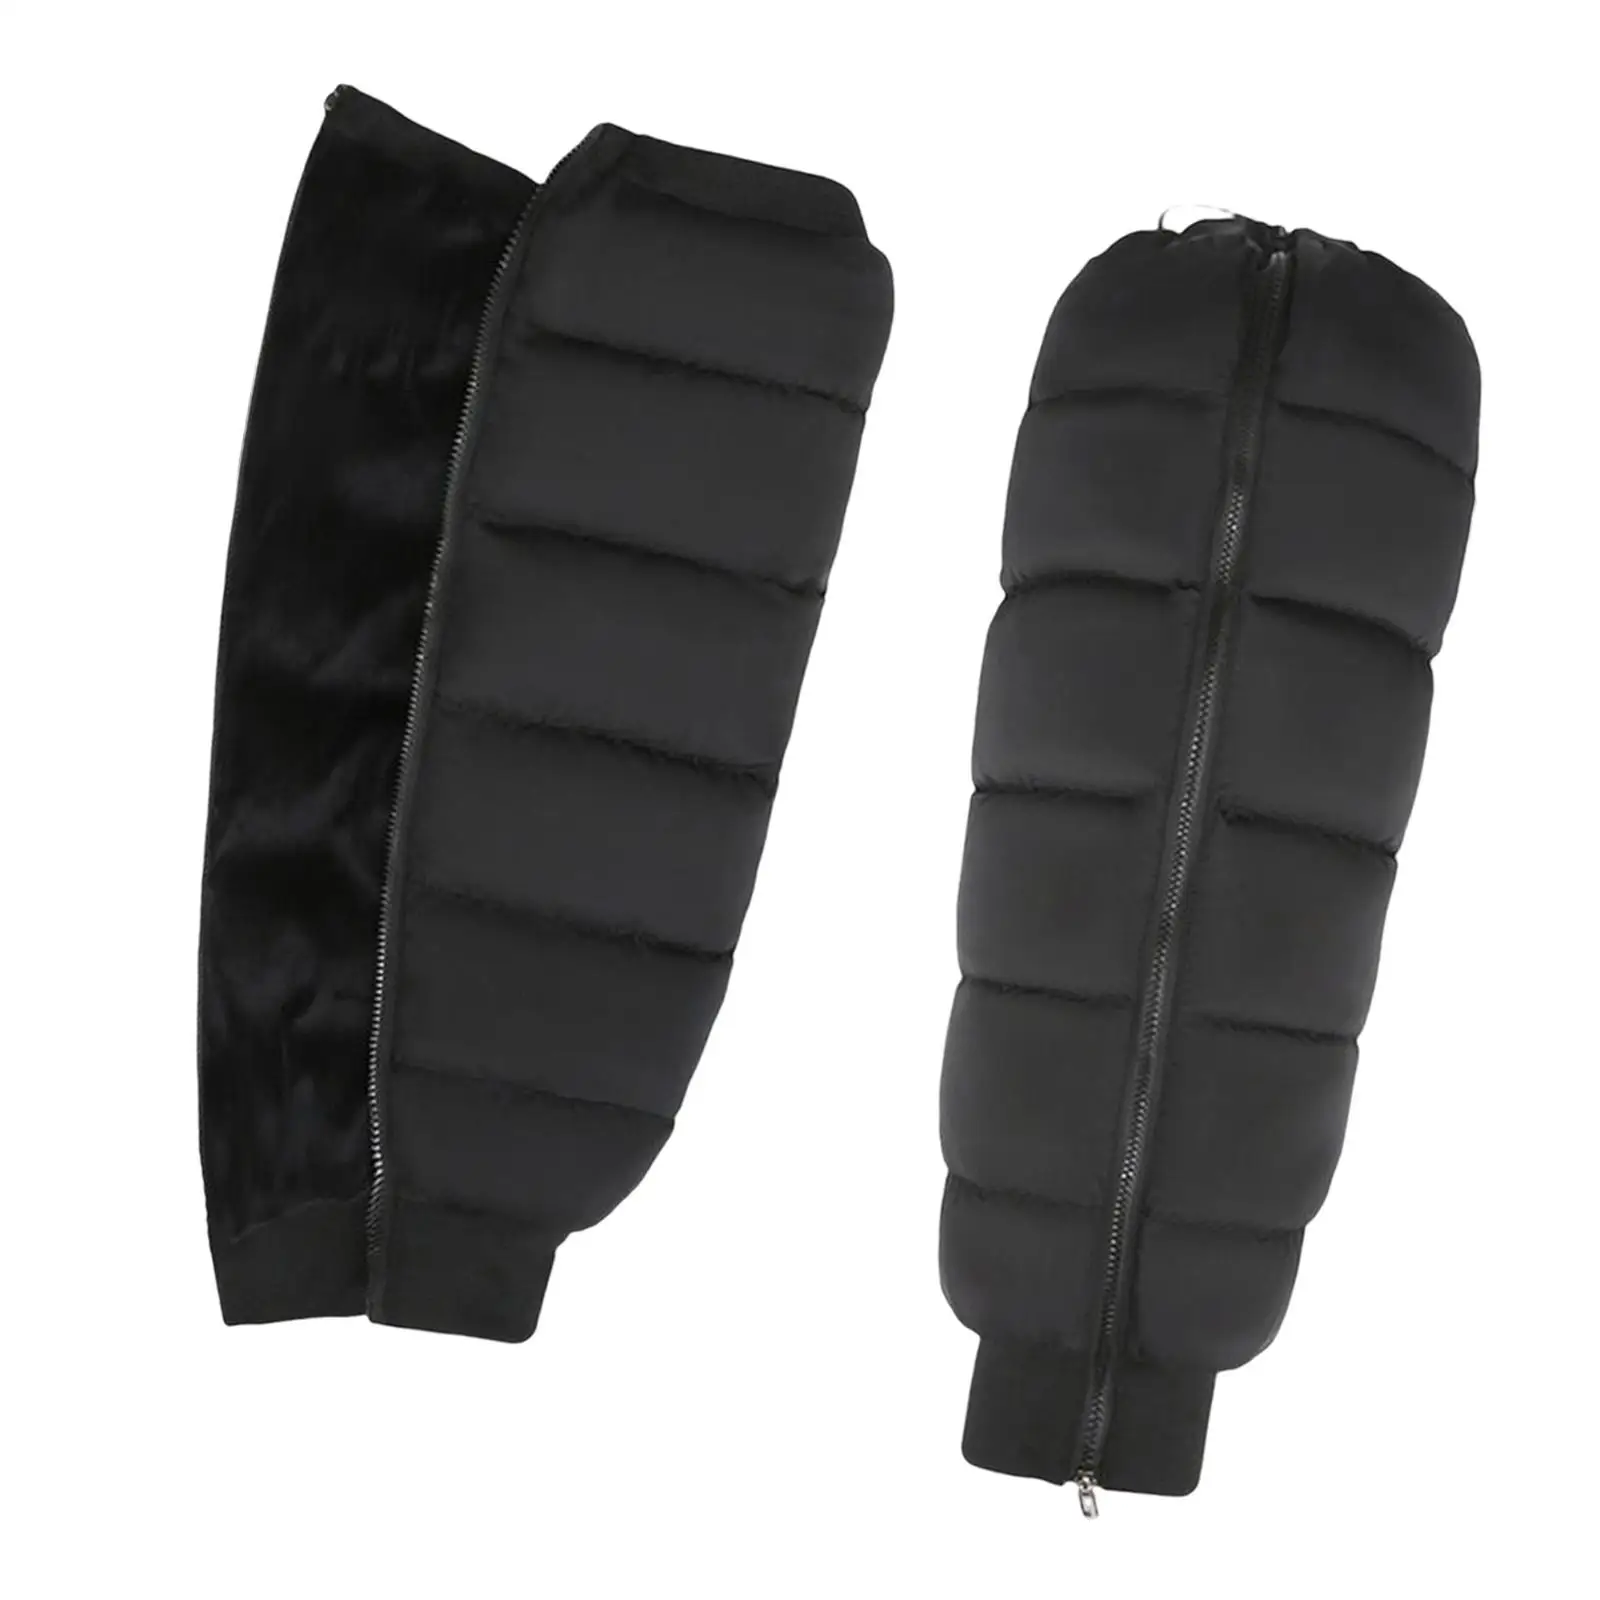 2 Packs Winter Knee Pads Protective Gear Windproof Protector for Skiing